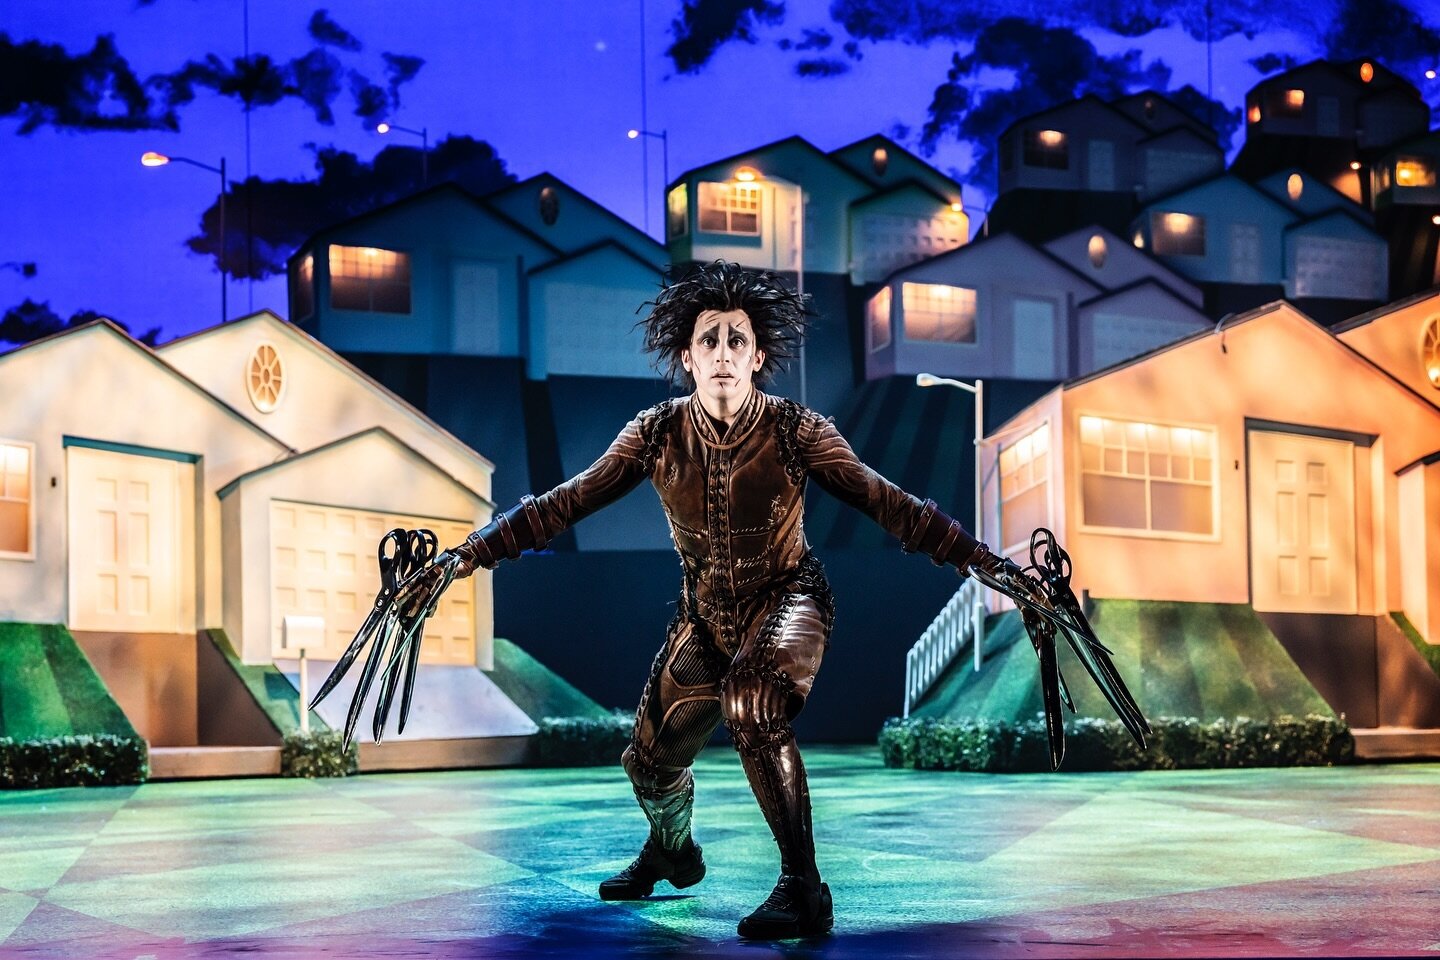 Casting has been announced for &lsquo;Edward Scissorhands&rsquo;, which will be visiting @thecentre_yganolfan this spring as part of an 18-week UK tour. ✂️⭐️

Click The Link In Our Bio To Find Out More!⭐️

#cardiff #theatre #cymru #wales #walesmillen